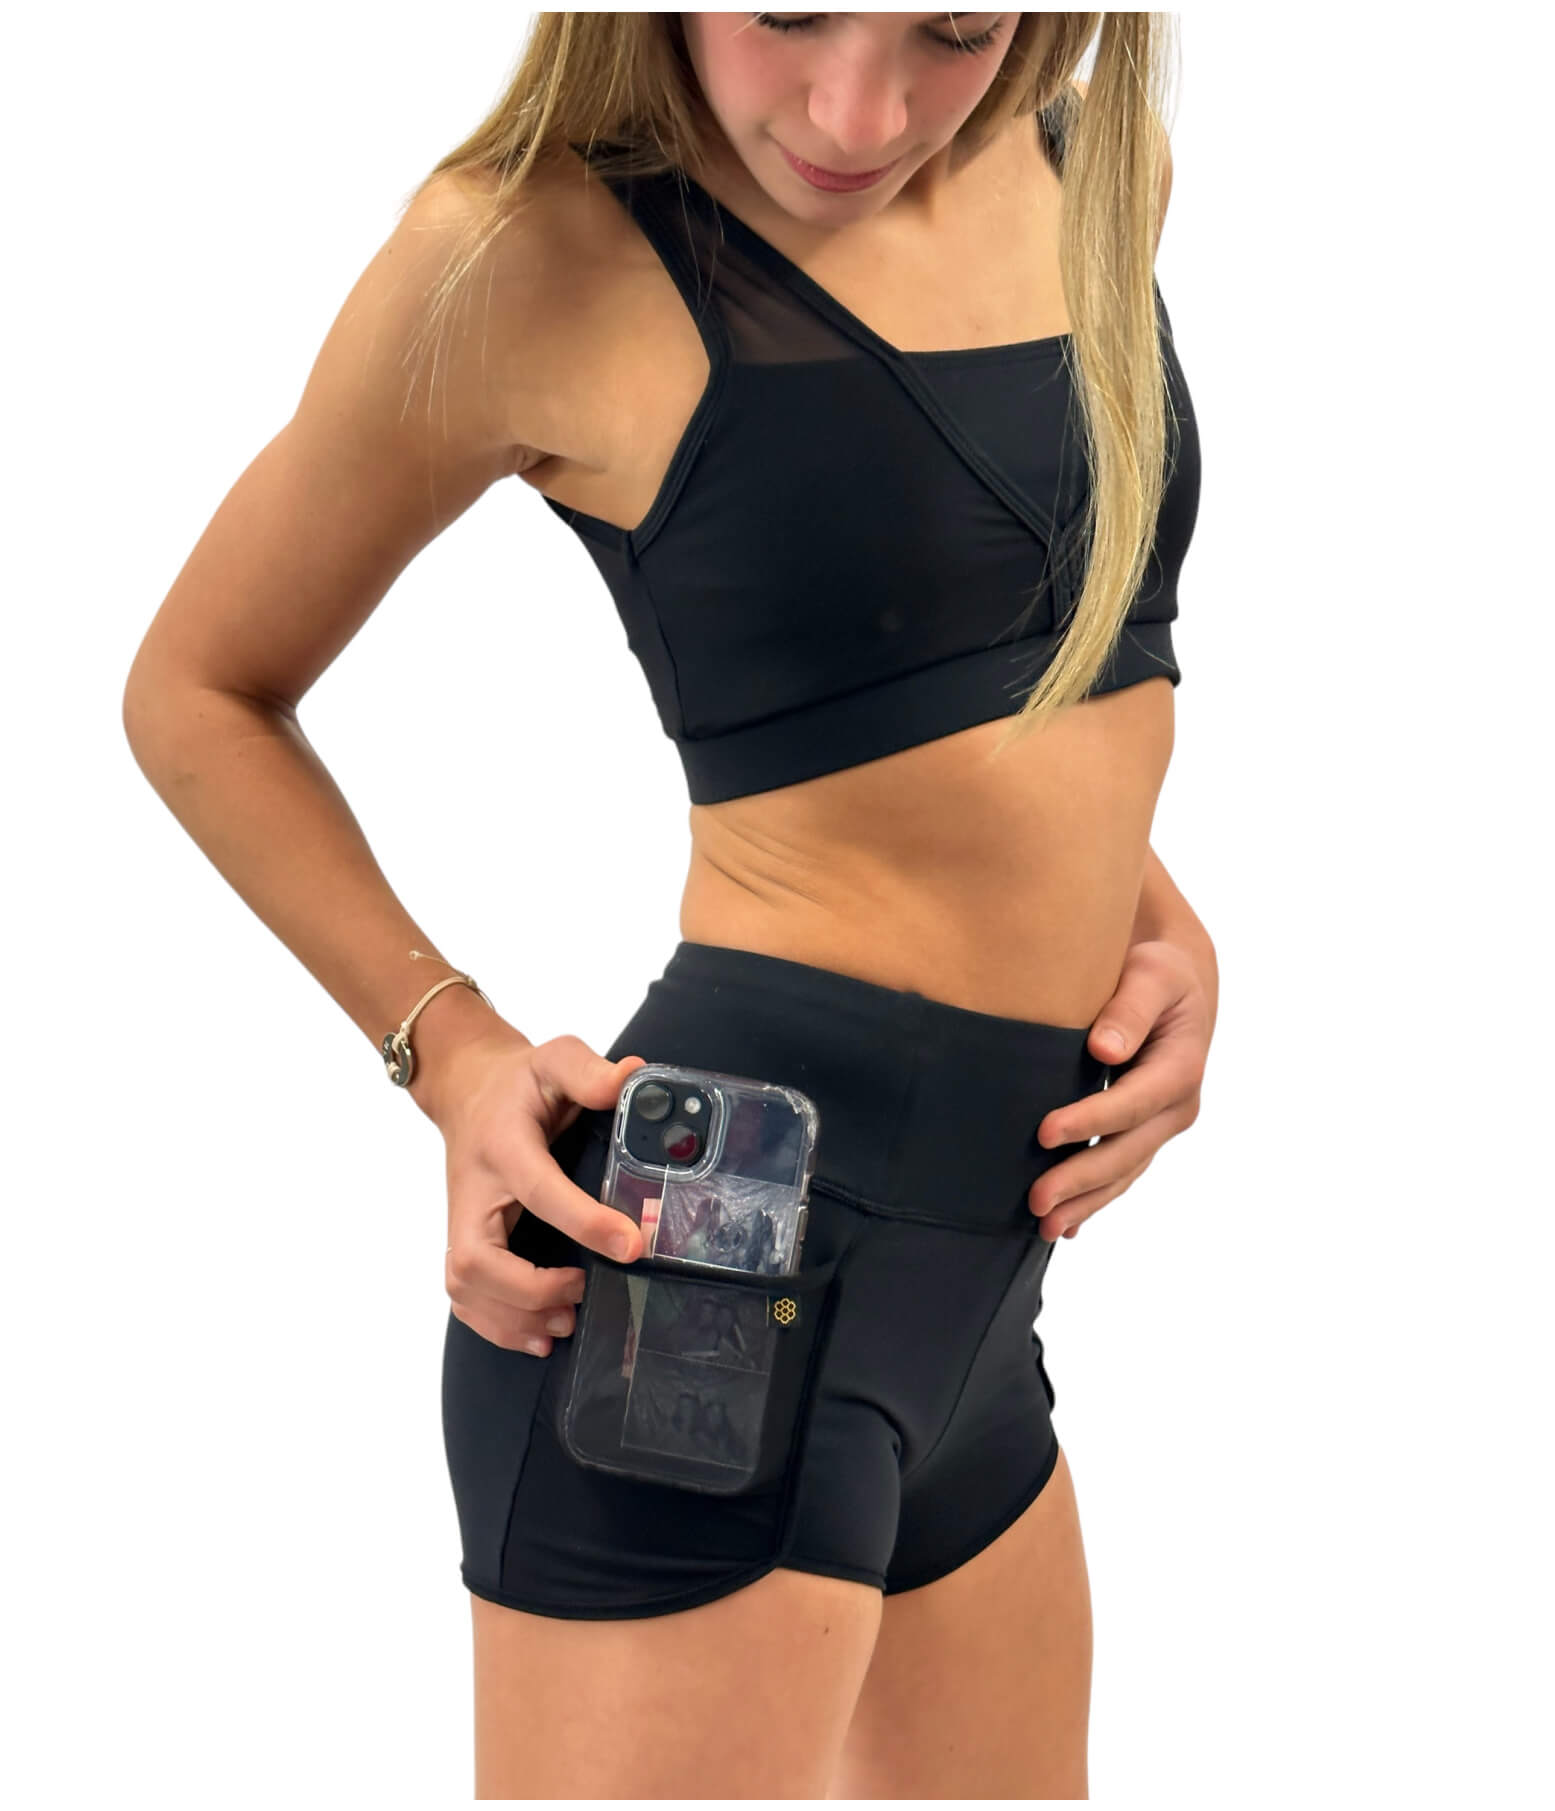 Royal Active Bra Concealed Carry Holster